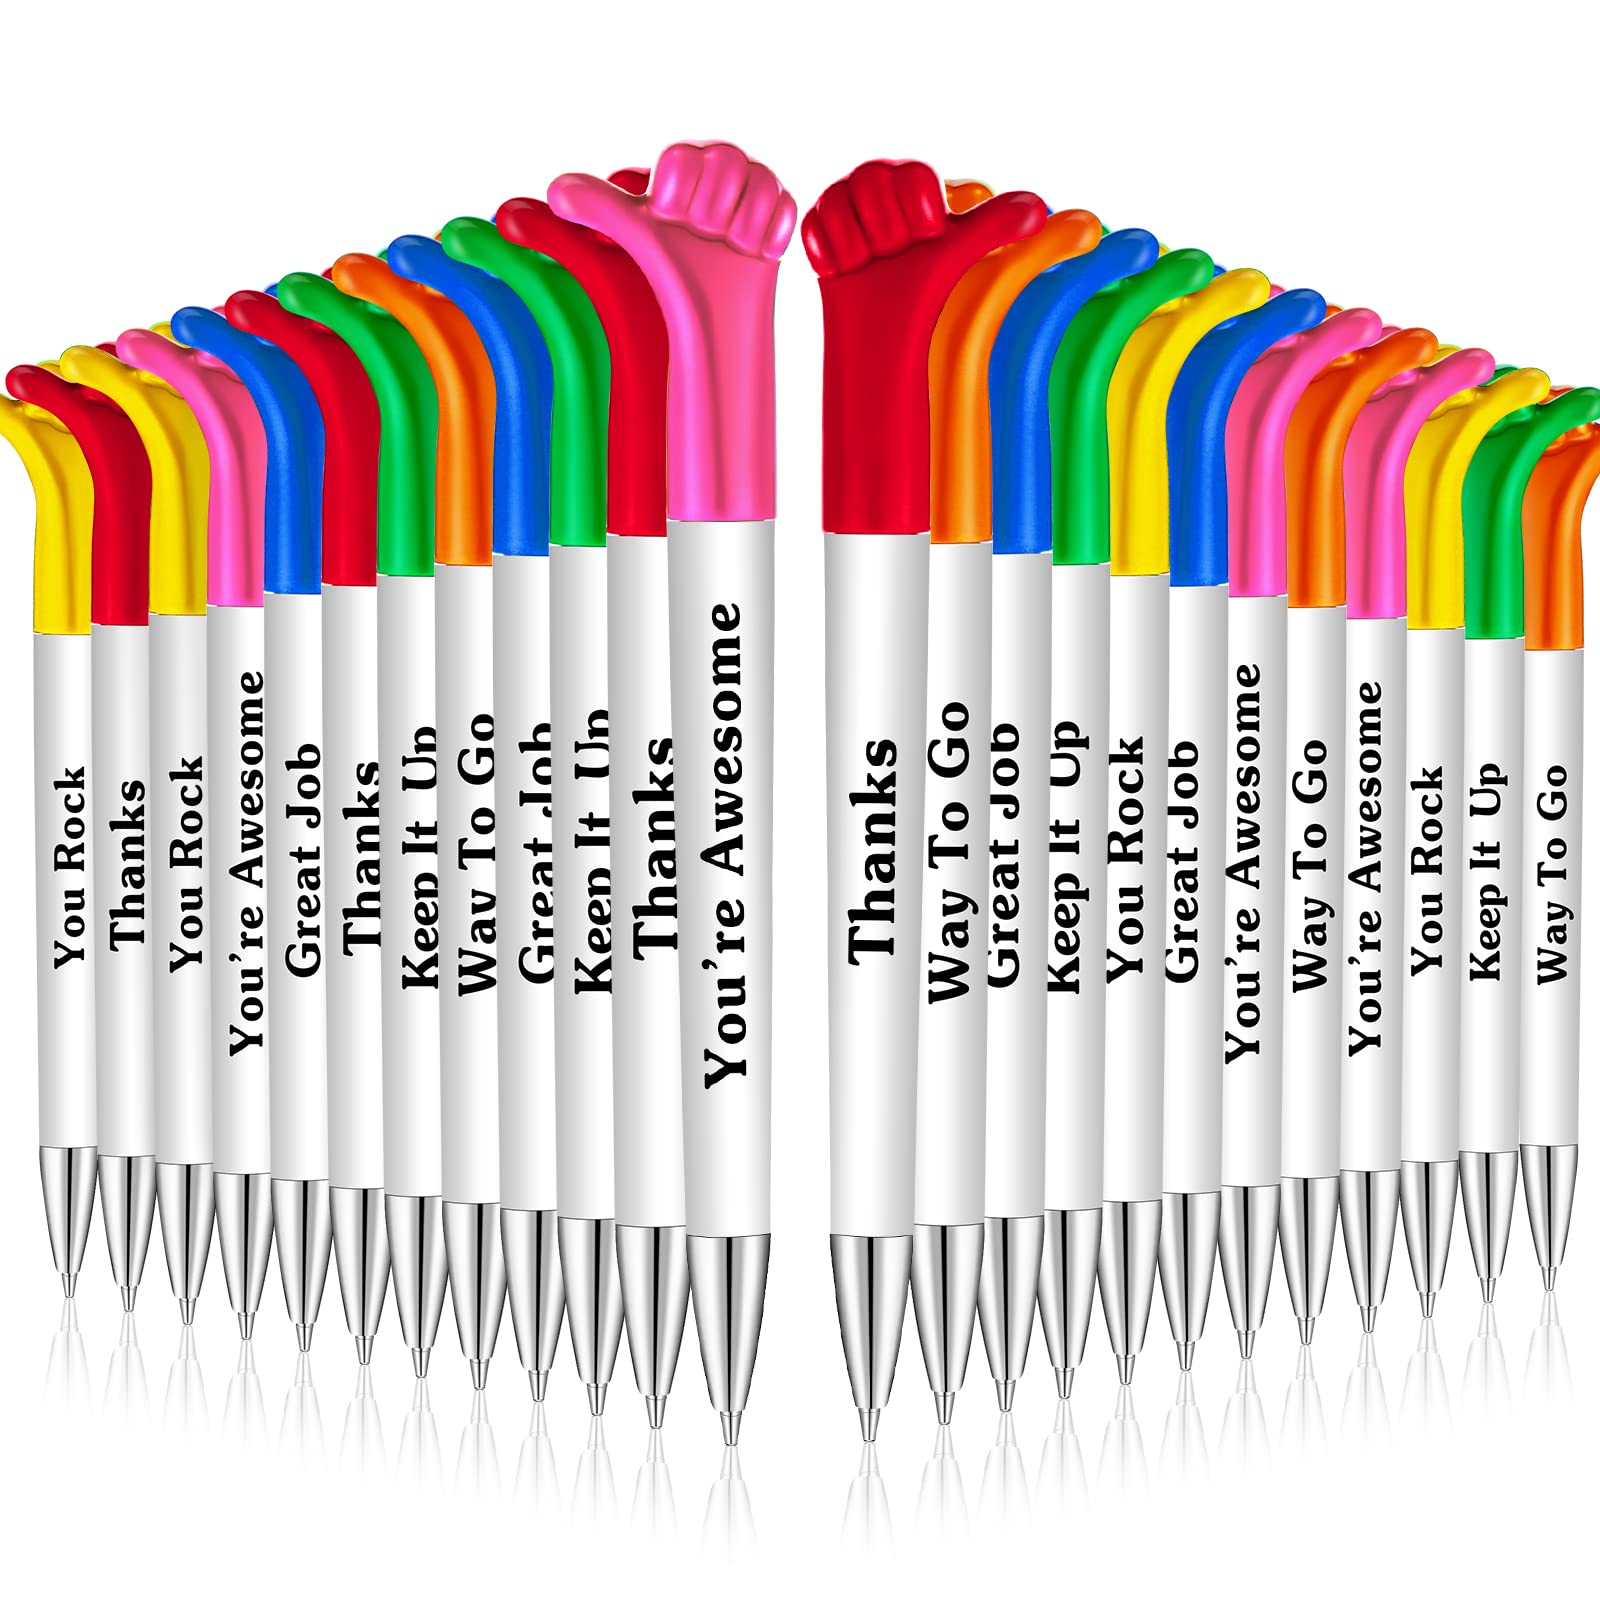 Woanger Inspirational Quotes Thumbs up Pens